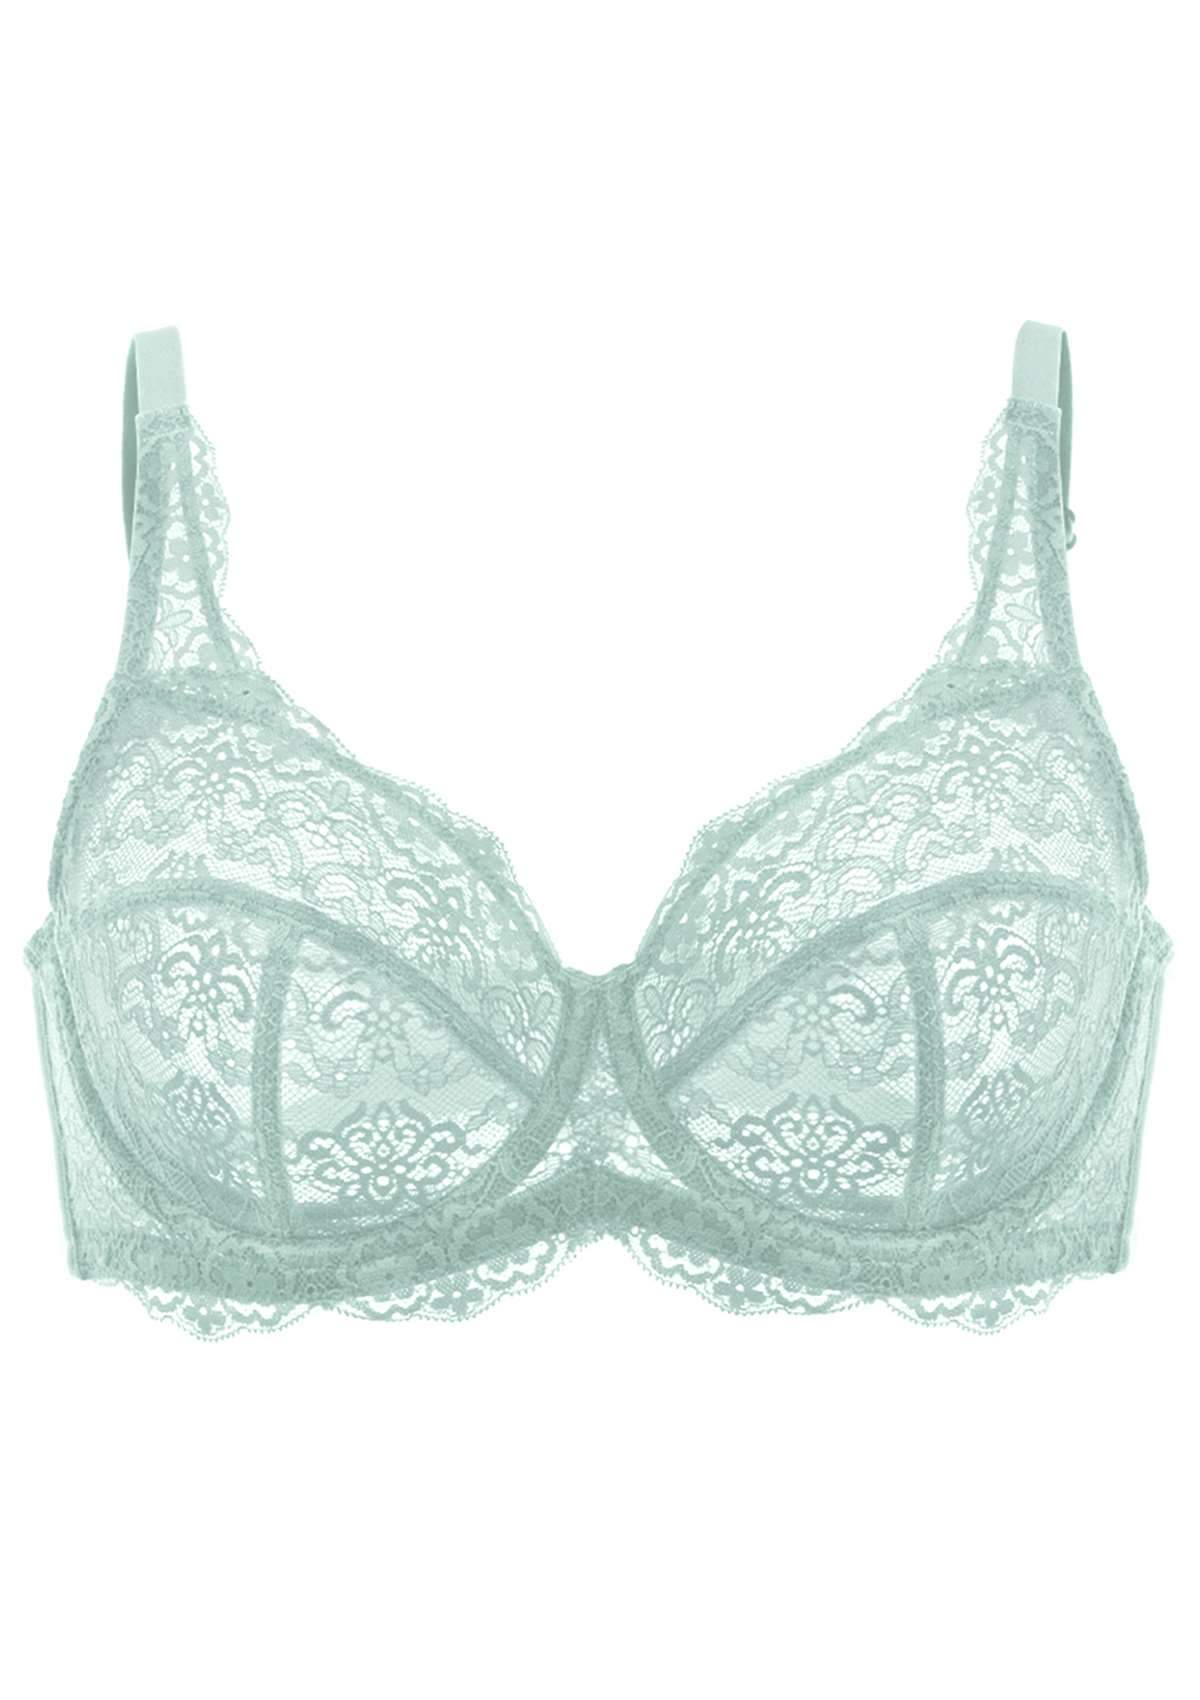 HSIA All-Over Floral Lace: Best Bra For Elderly With Sagging Breasts - Crystal Blue / 42 / C